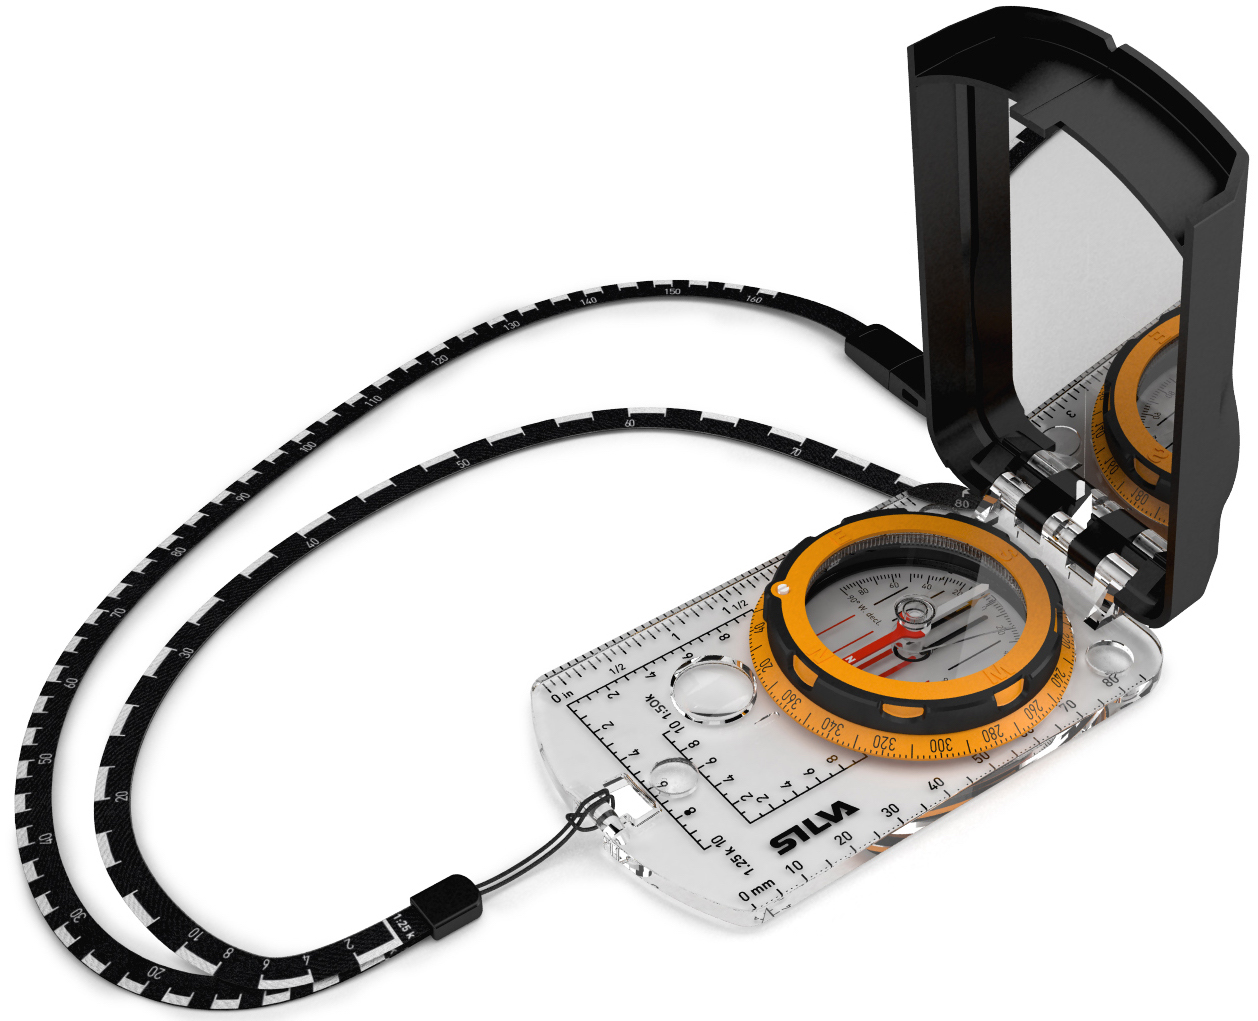 Silva - Expedition S - Compass